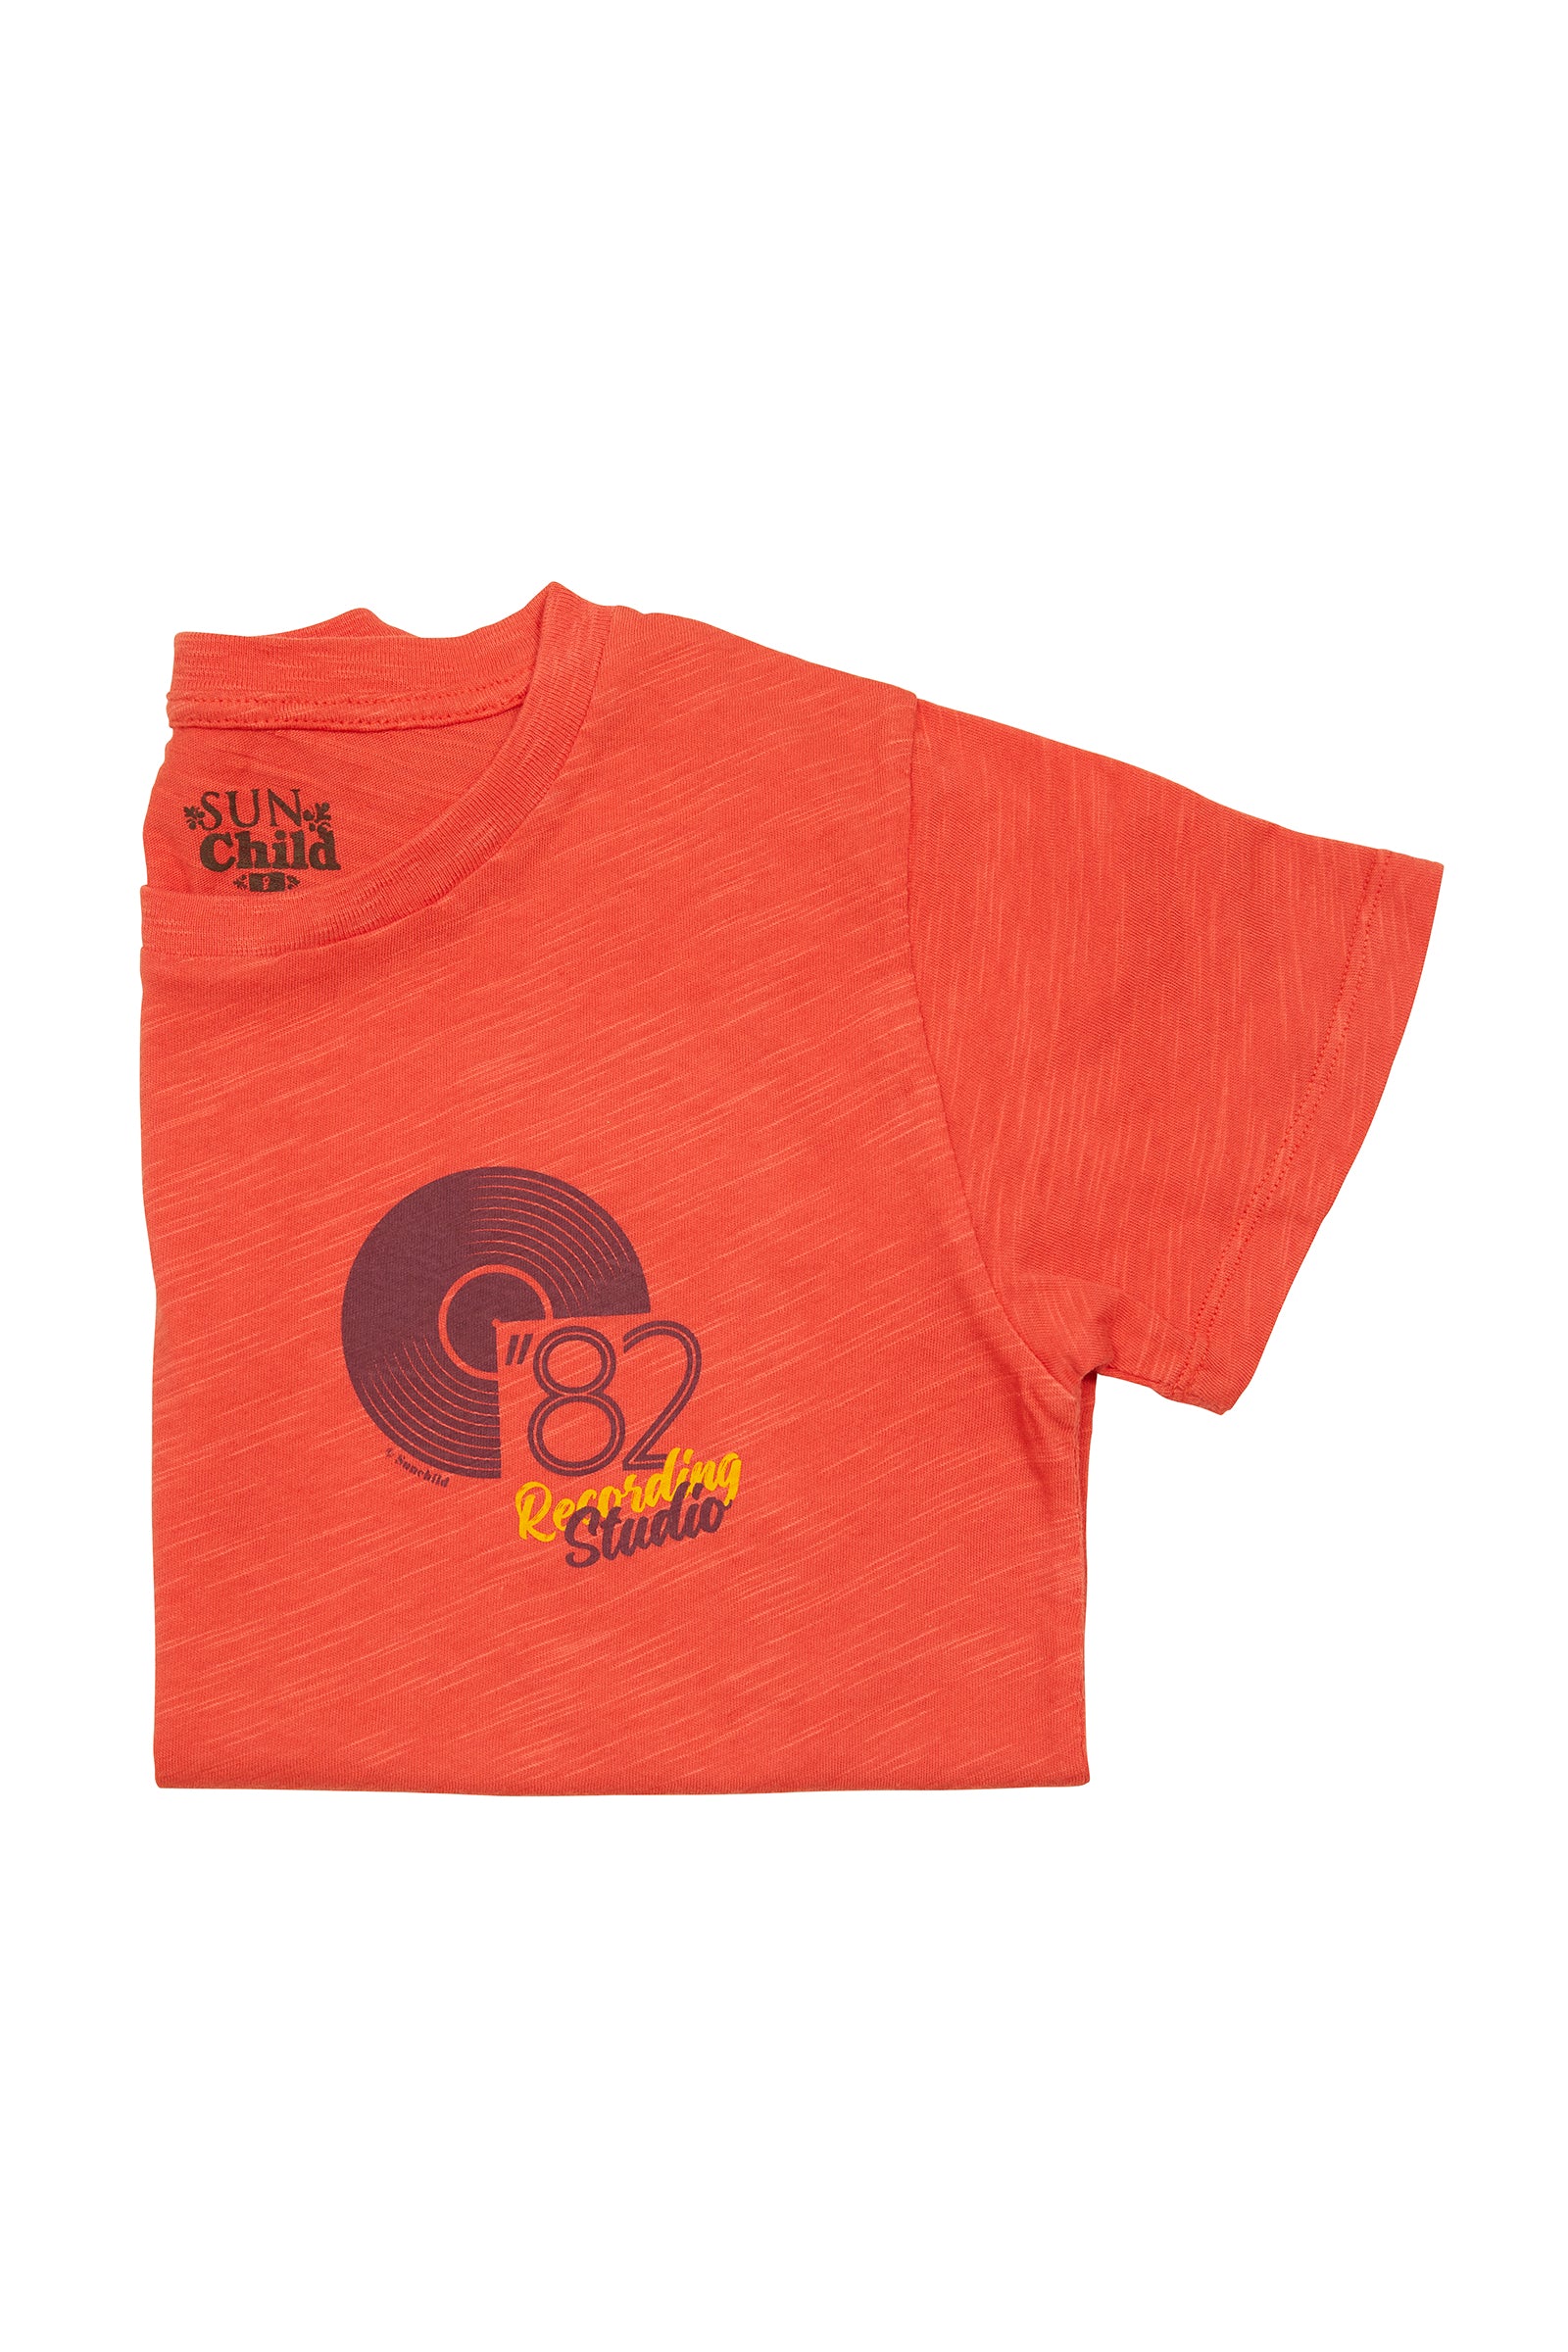 Orange t-shrit with record and 82 studio label on the right front side